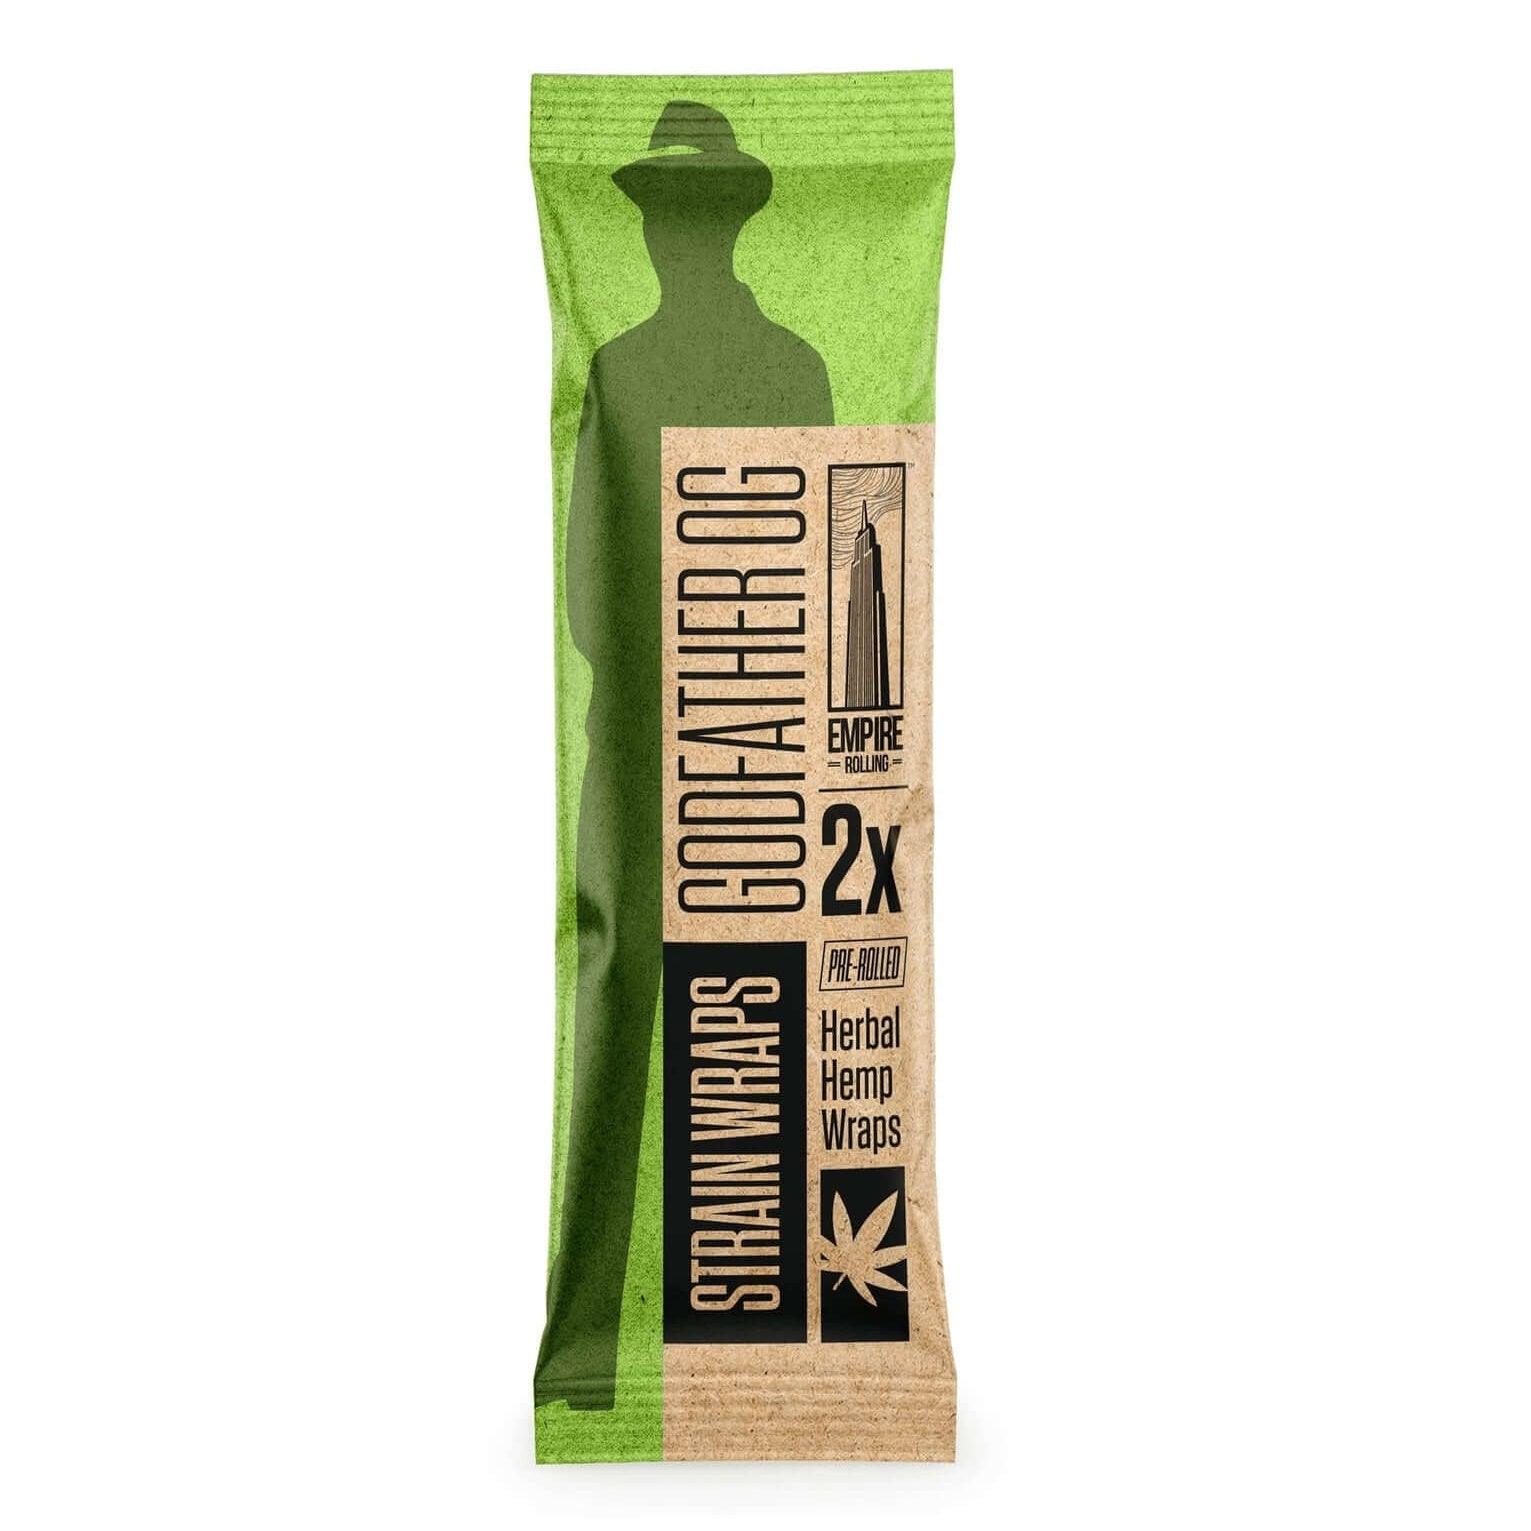 Empire Rolling's King Size Organic Hemp Rolling Papers, eco-friendly and crafted with high-quality, natural materials for a premium smoking experience.Strain Wraps: Godfather OG Hemp - Empire Rolling Papers